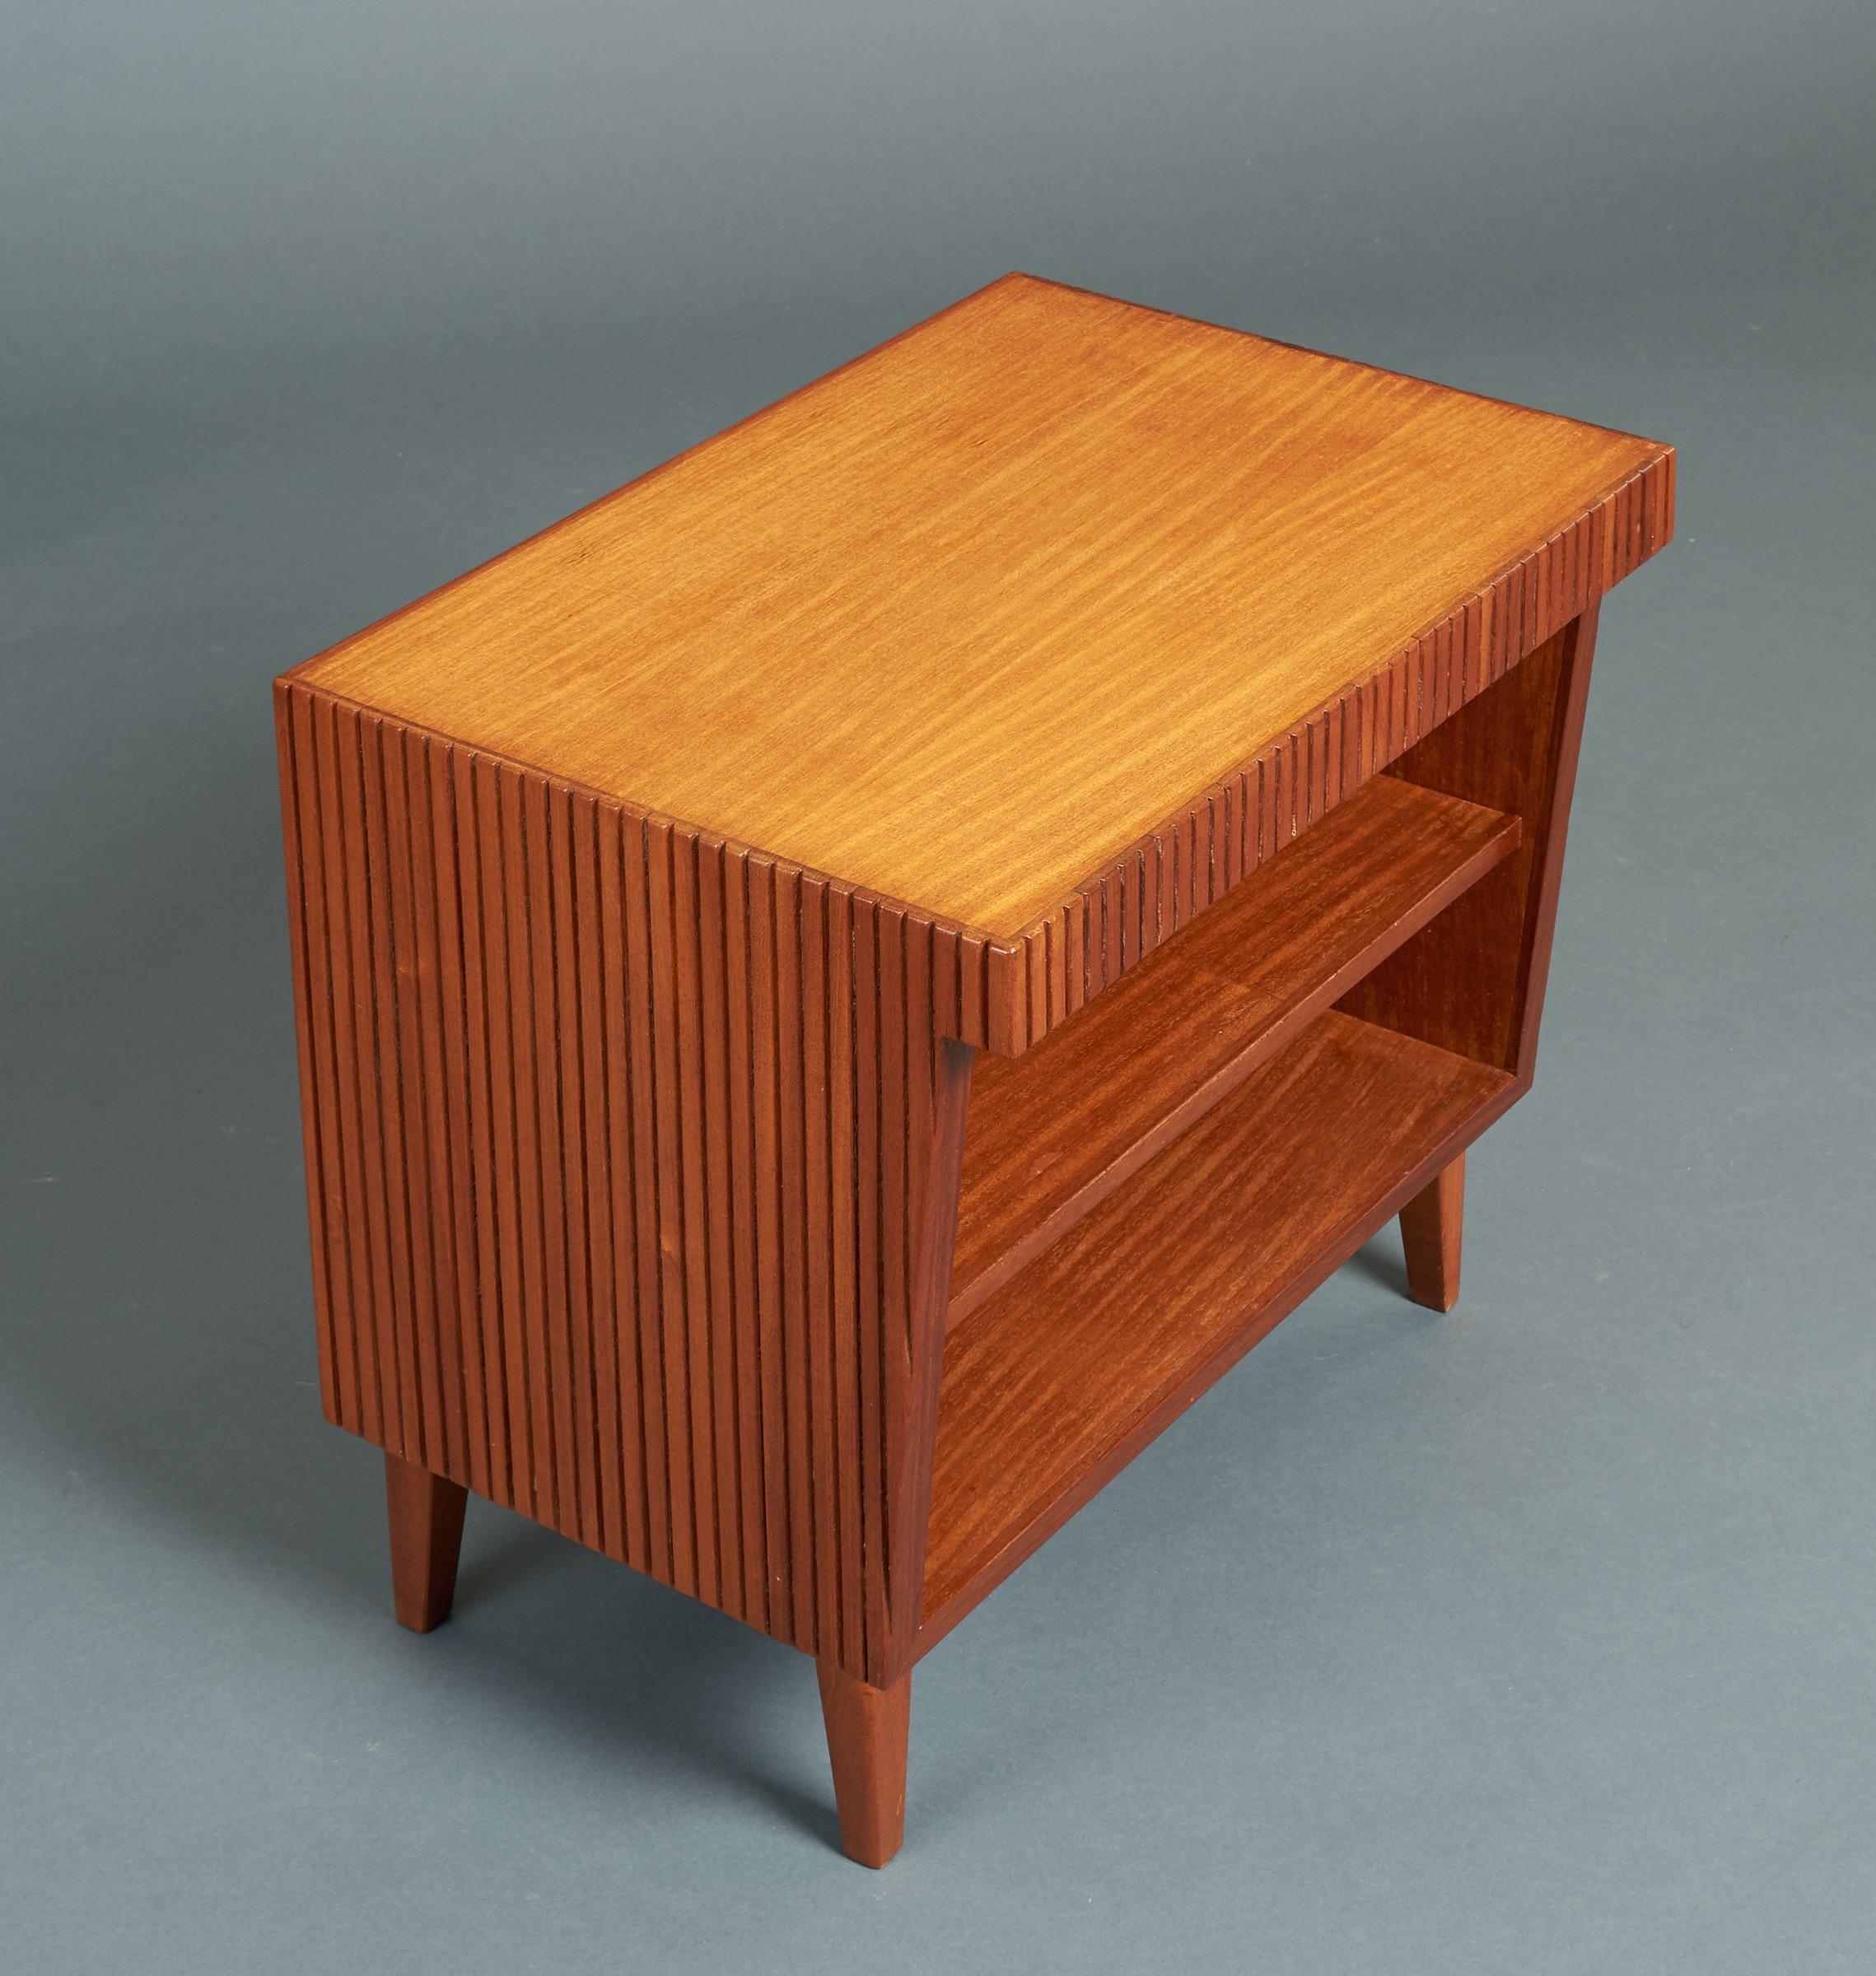 Gio Ponti, End Table with Bookshelves in Reeded Mahogany, Desk Set, Italy, 1950s (Moderne der Mitte des Jahrhunderts)